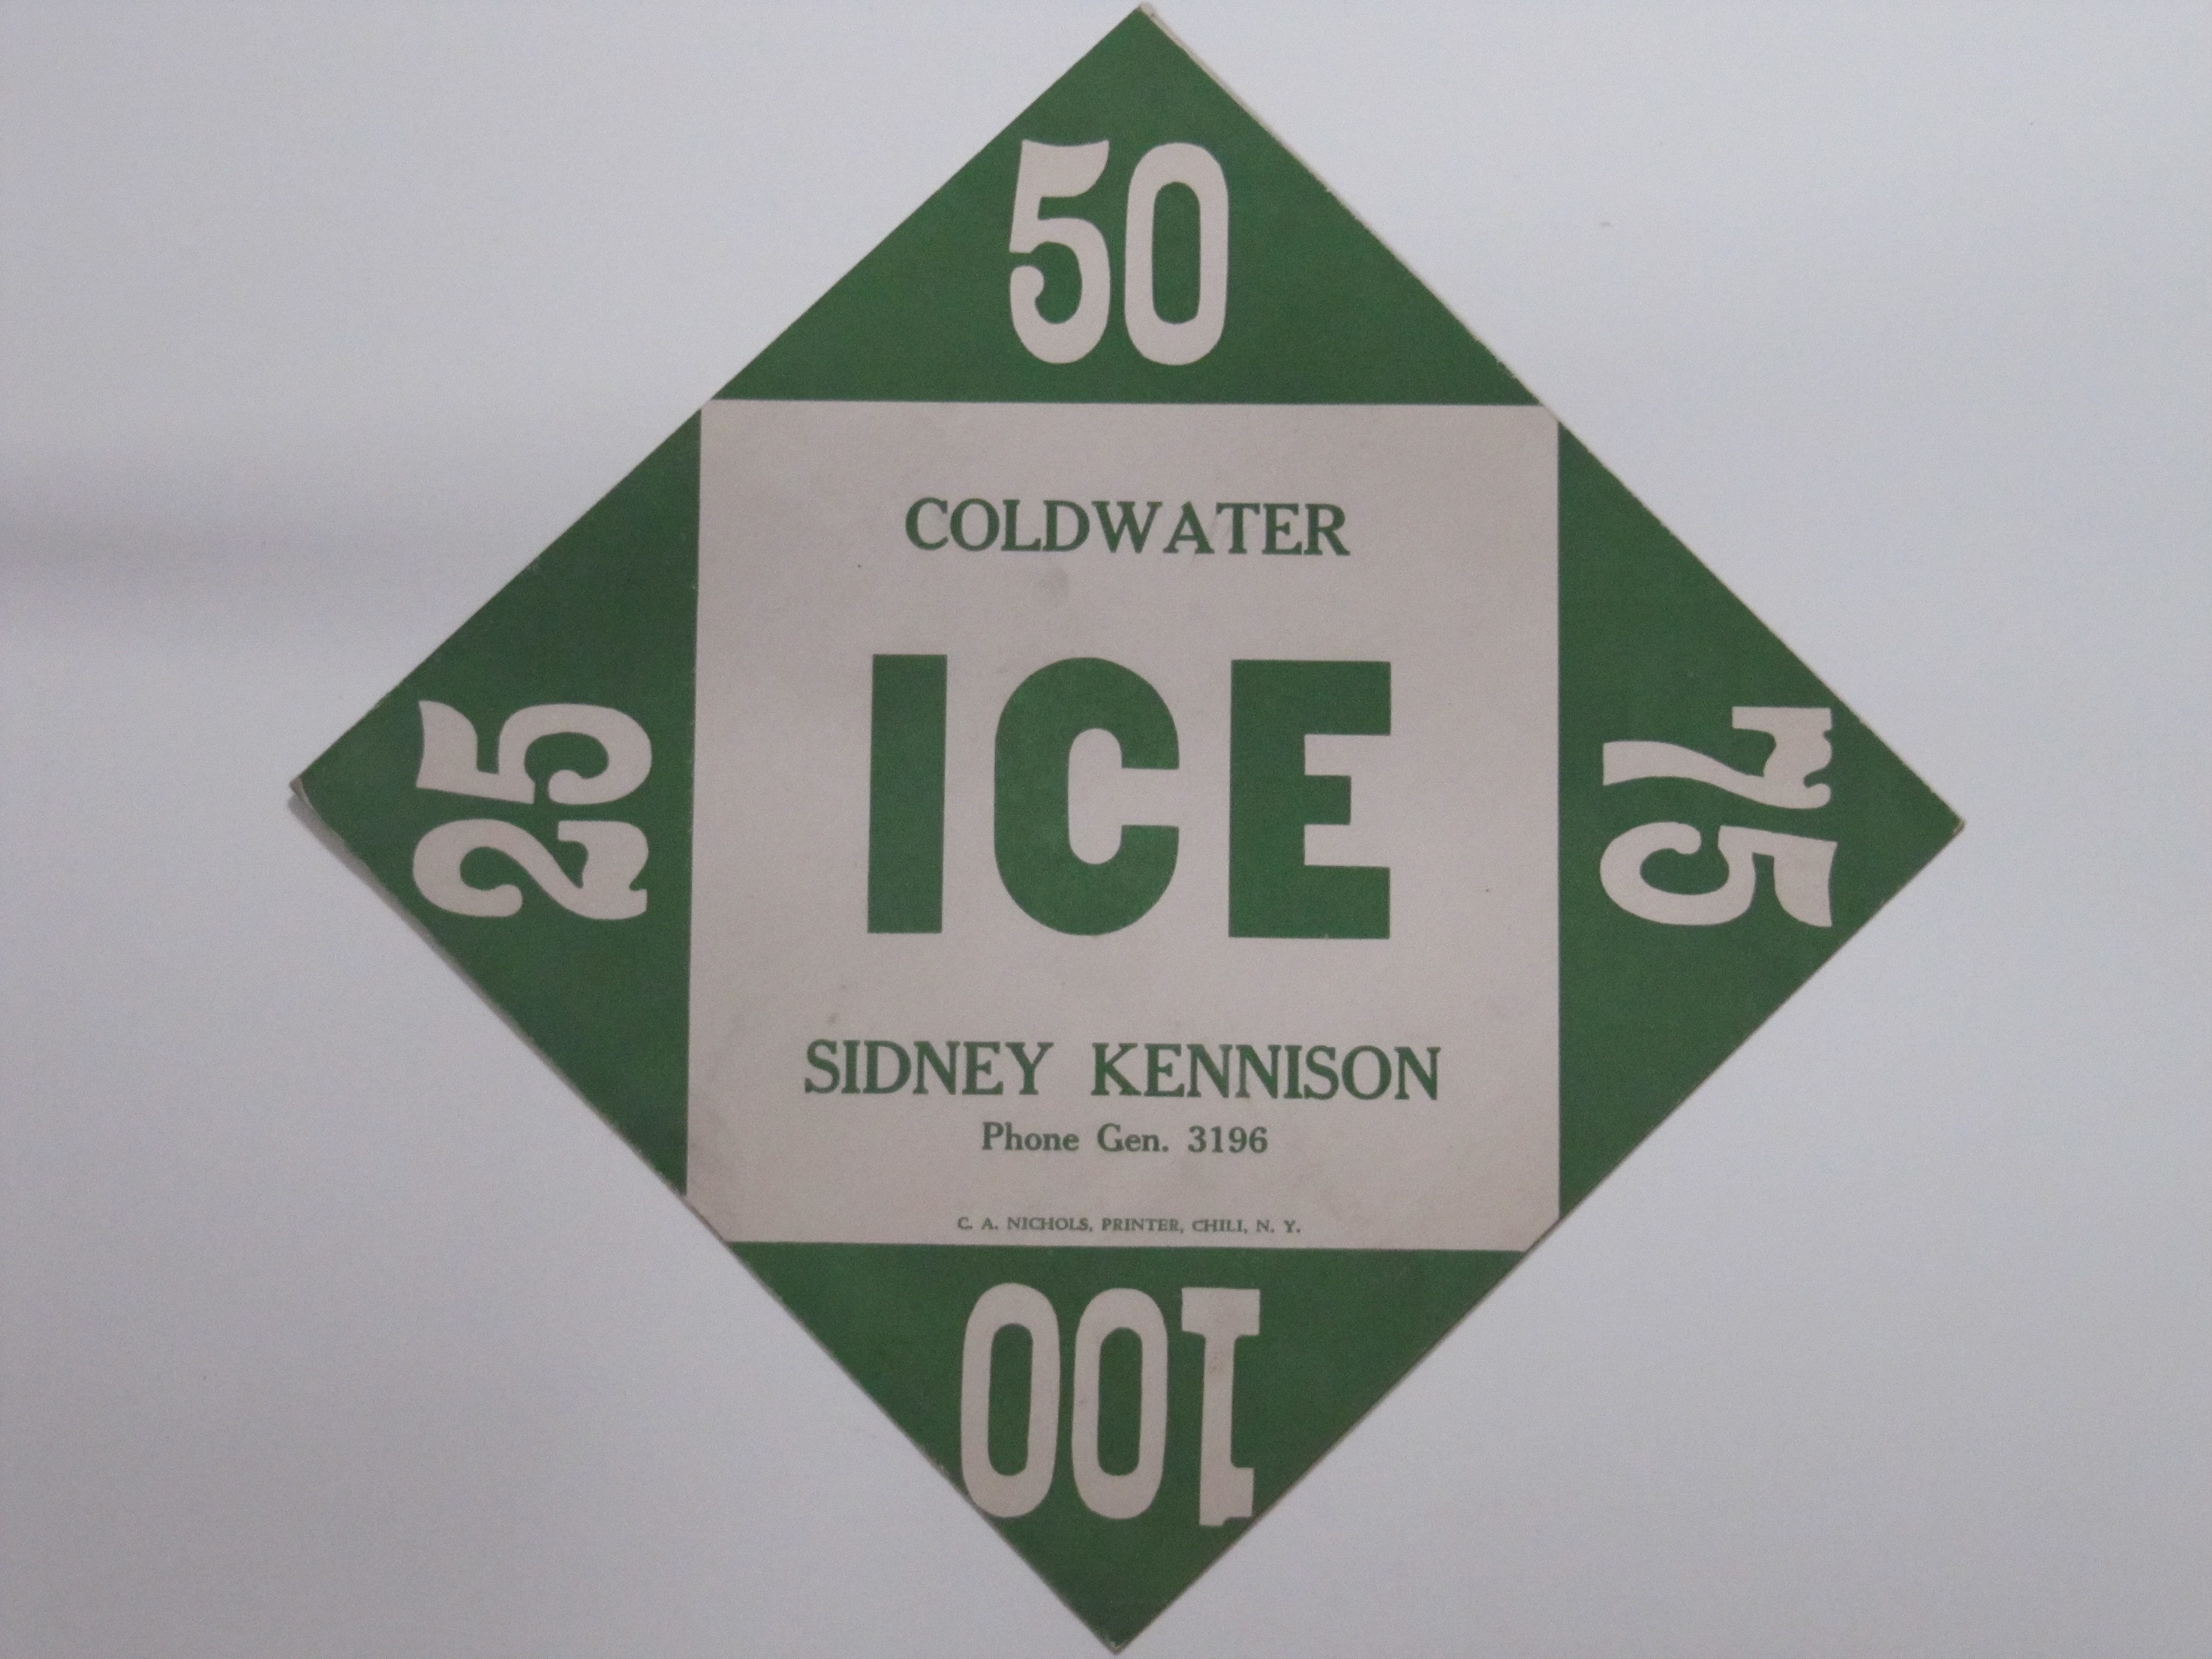 Coldwater Ice